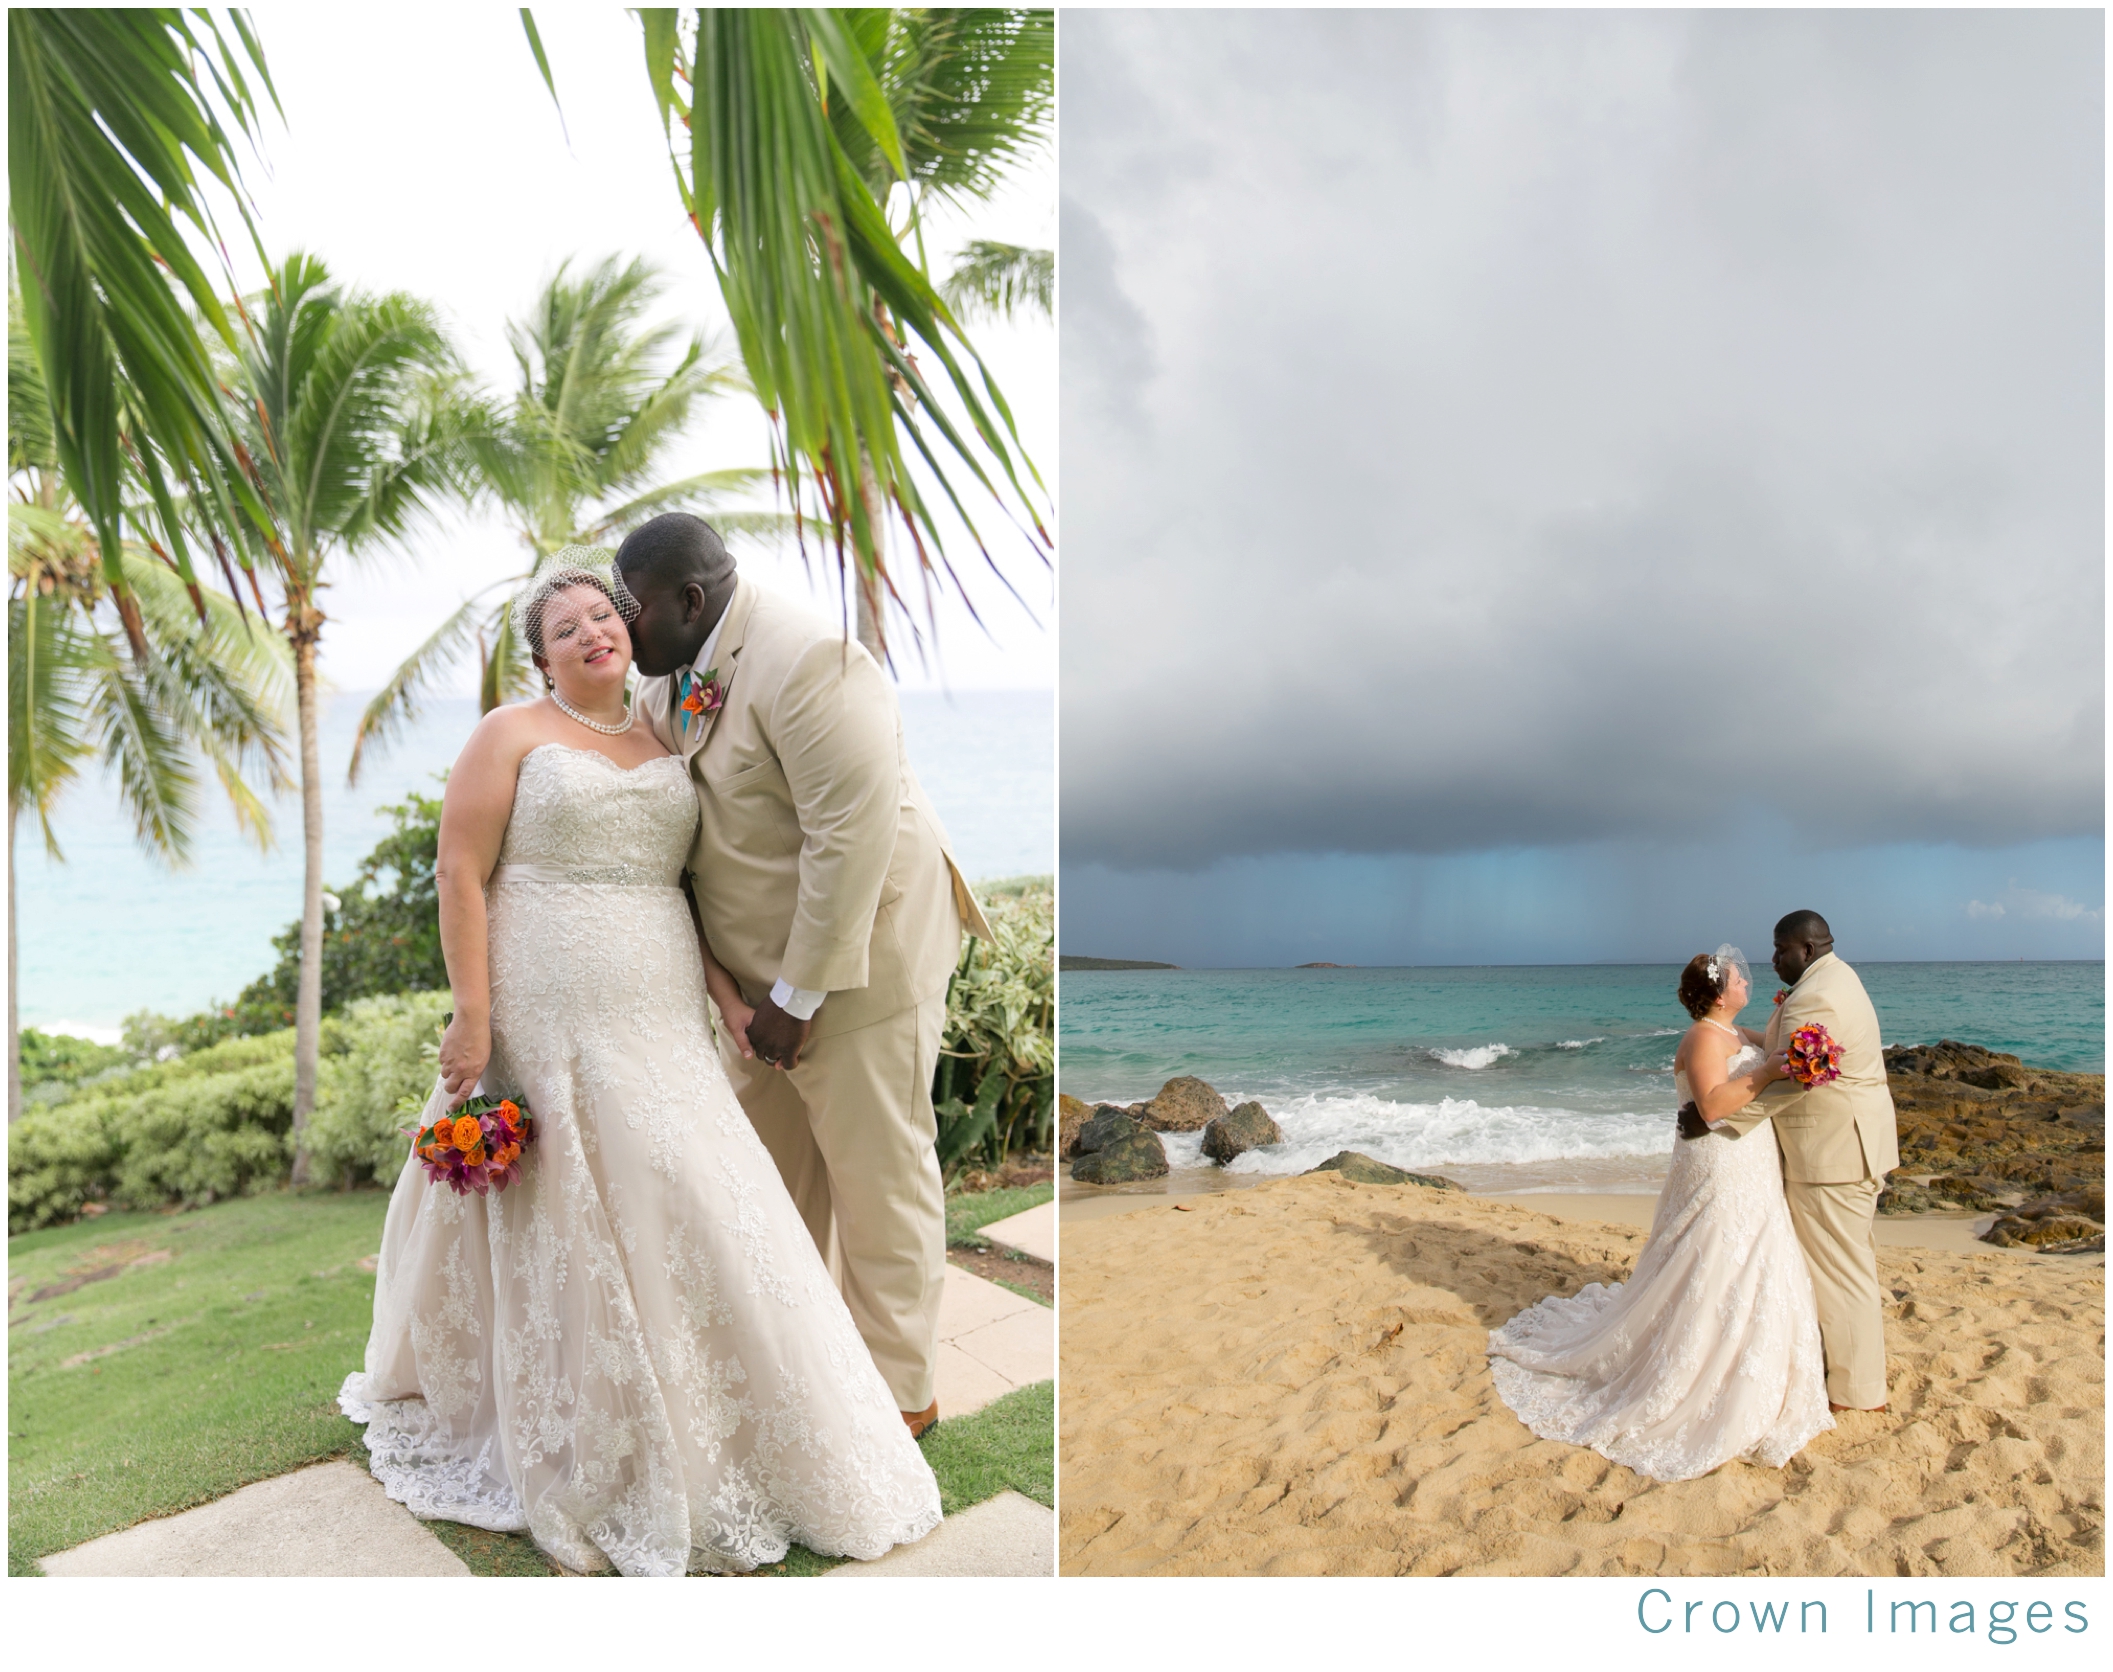 st thomas wedding photos at the marriott crown images_1708.jpg